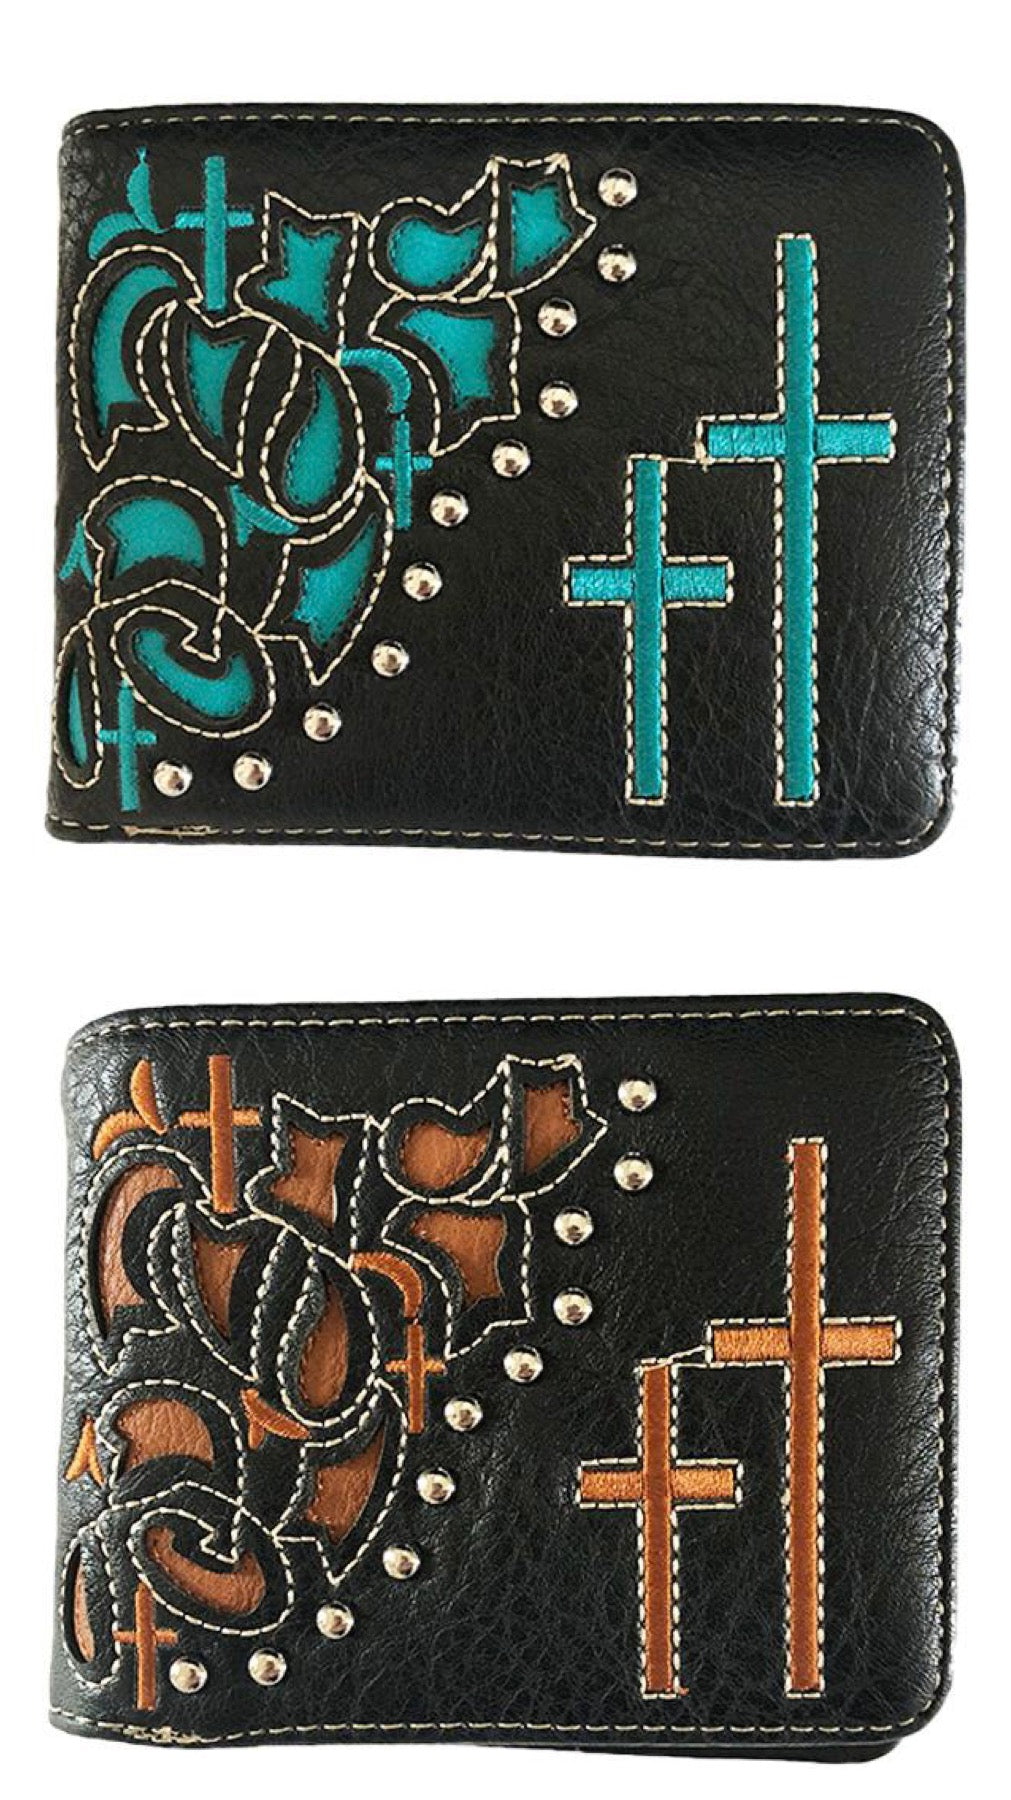 MENS WESTERN BIFOLD WALLET WITH EMBROIDERED CROSSES - Lil Monkey Boutique